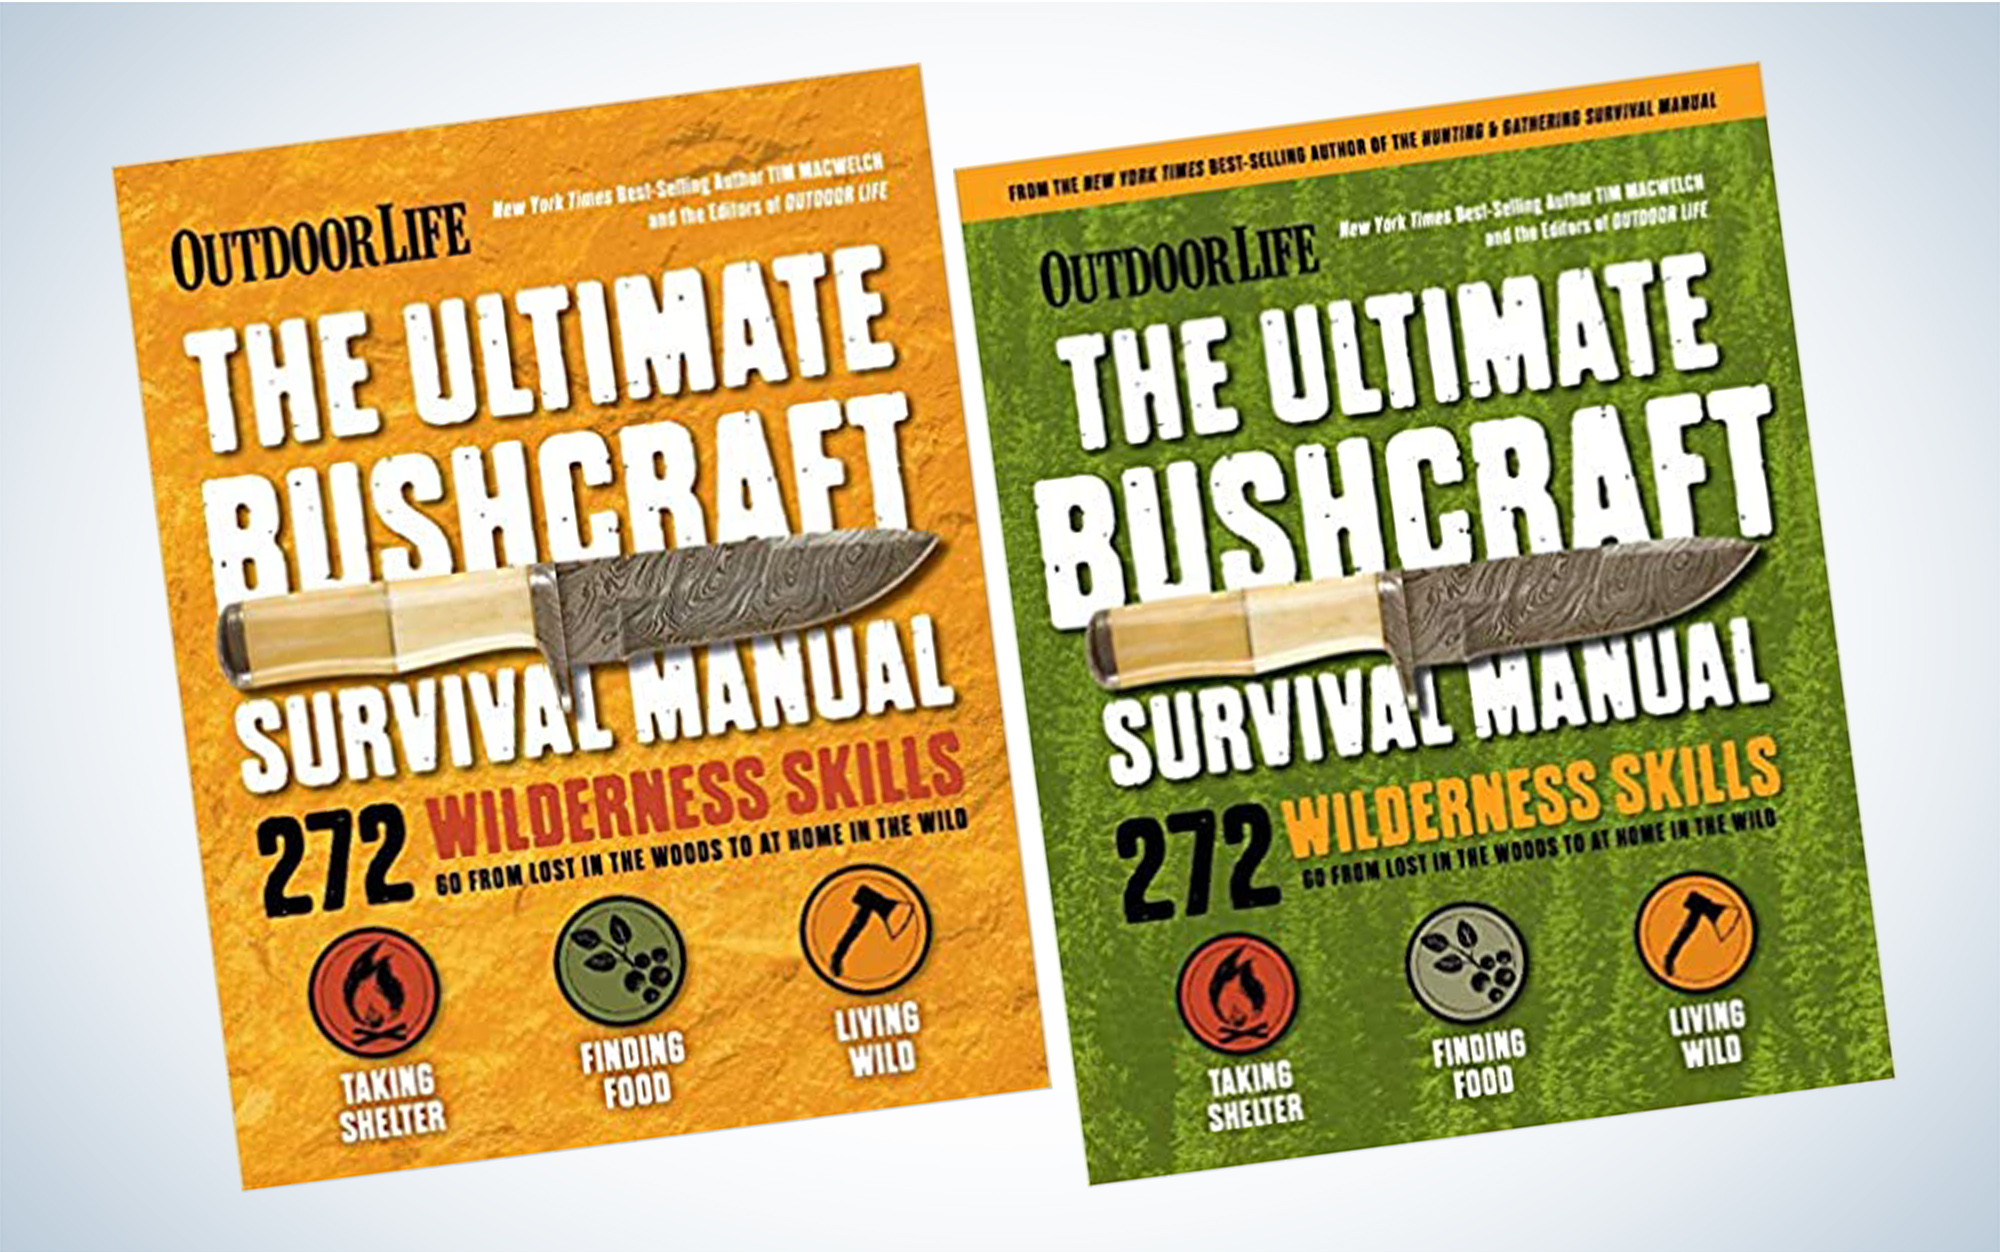 12 Essential items people should have with them when they venture outdoors  - Bushcraft Survival Australia